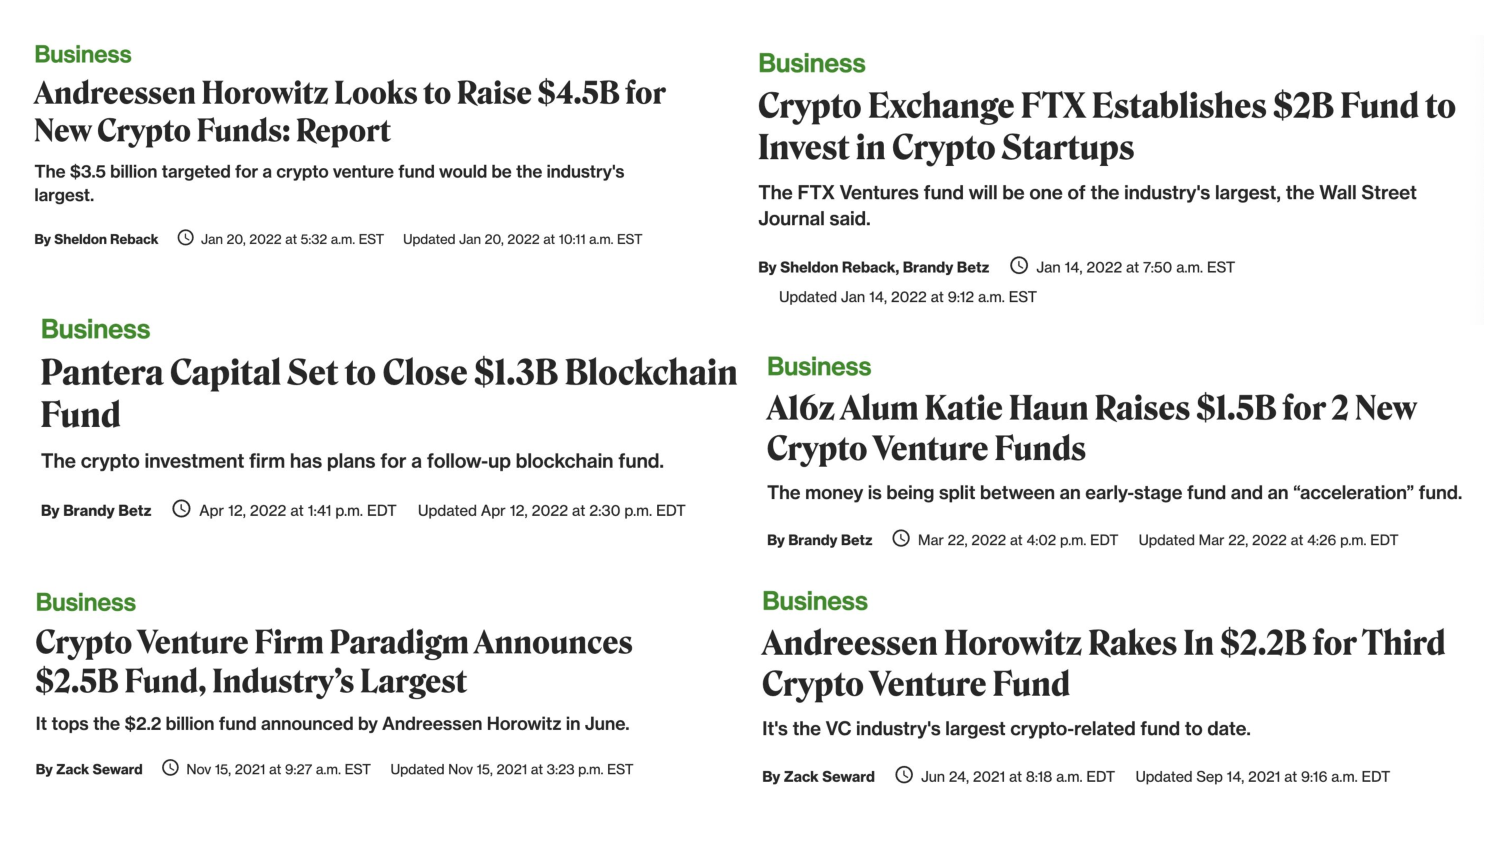 A collage of headlines. January 20, 2022: Andreessen Horowitz Looks to Raise $4.5B for New Crypo Funds: Report. April 12, 2022: Pantera Capital Set to Close $1.3B Blockchain Fund. November 15, 2021: Crypto Venture Firm Paradigm Announces $2.5B Fund, Industry's Largest. January 14, 2022: Crypto Exchange FTX Establishes $2B Fund to Invest in Crypto Startups. March 22, 2022: A16z Alum Katie Haun Raises $1.5B for 2New Crypto Venture Funds. June 24, 2021: Andreessen Horowitz Rakes in $2.2B for Third Crypto Venture Fund.